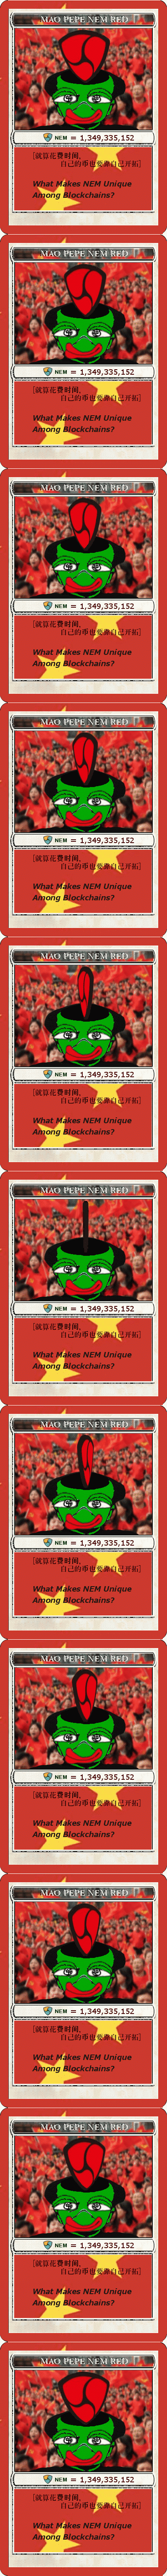 MAPEPENEMR Series 9, Card 35 Rare Pepe 2016 Counterparty XCP NFT [216 Issuance]